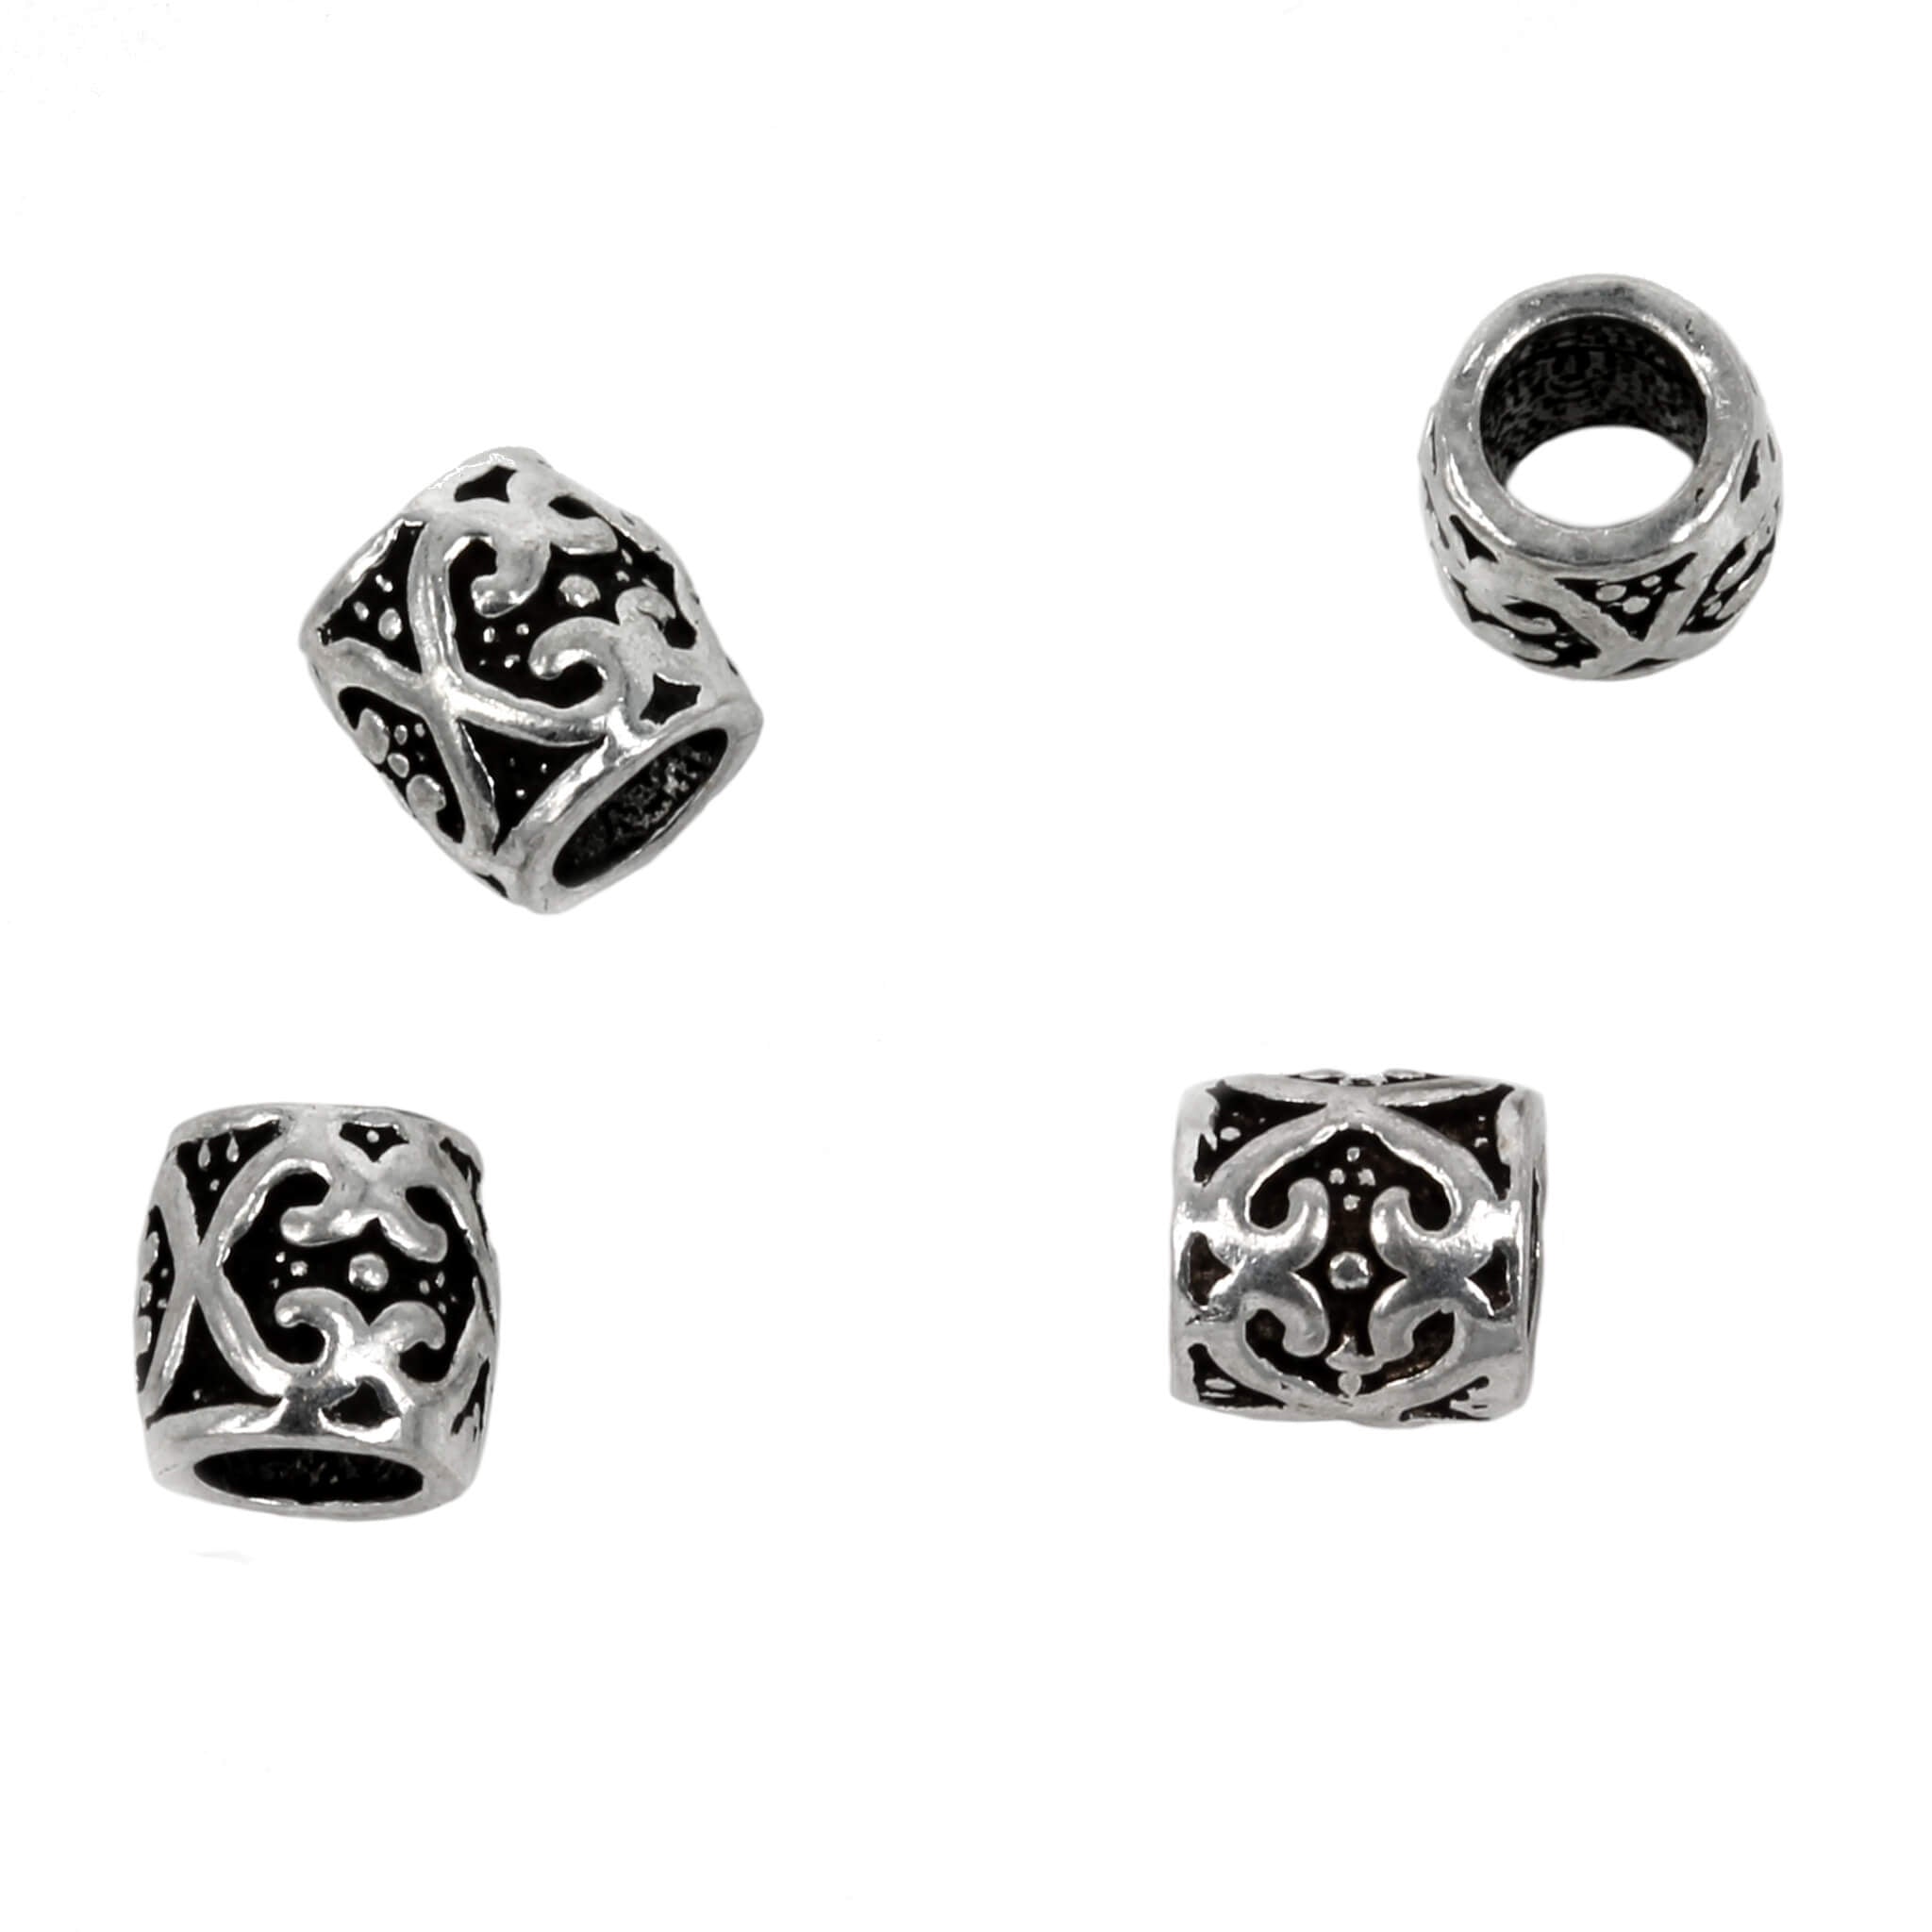 Barrel Bead with Flourish Patterns in Sterling Silver 7x6mm